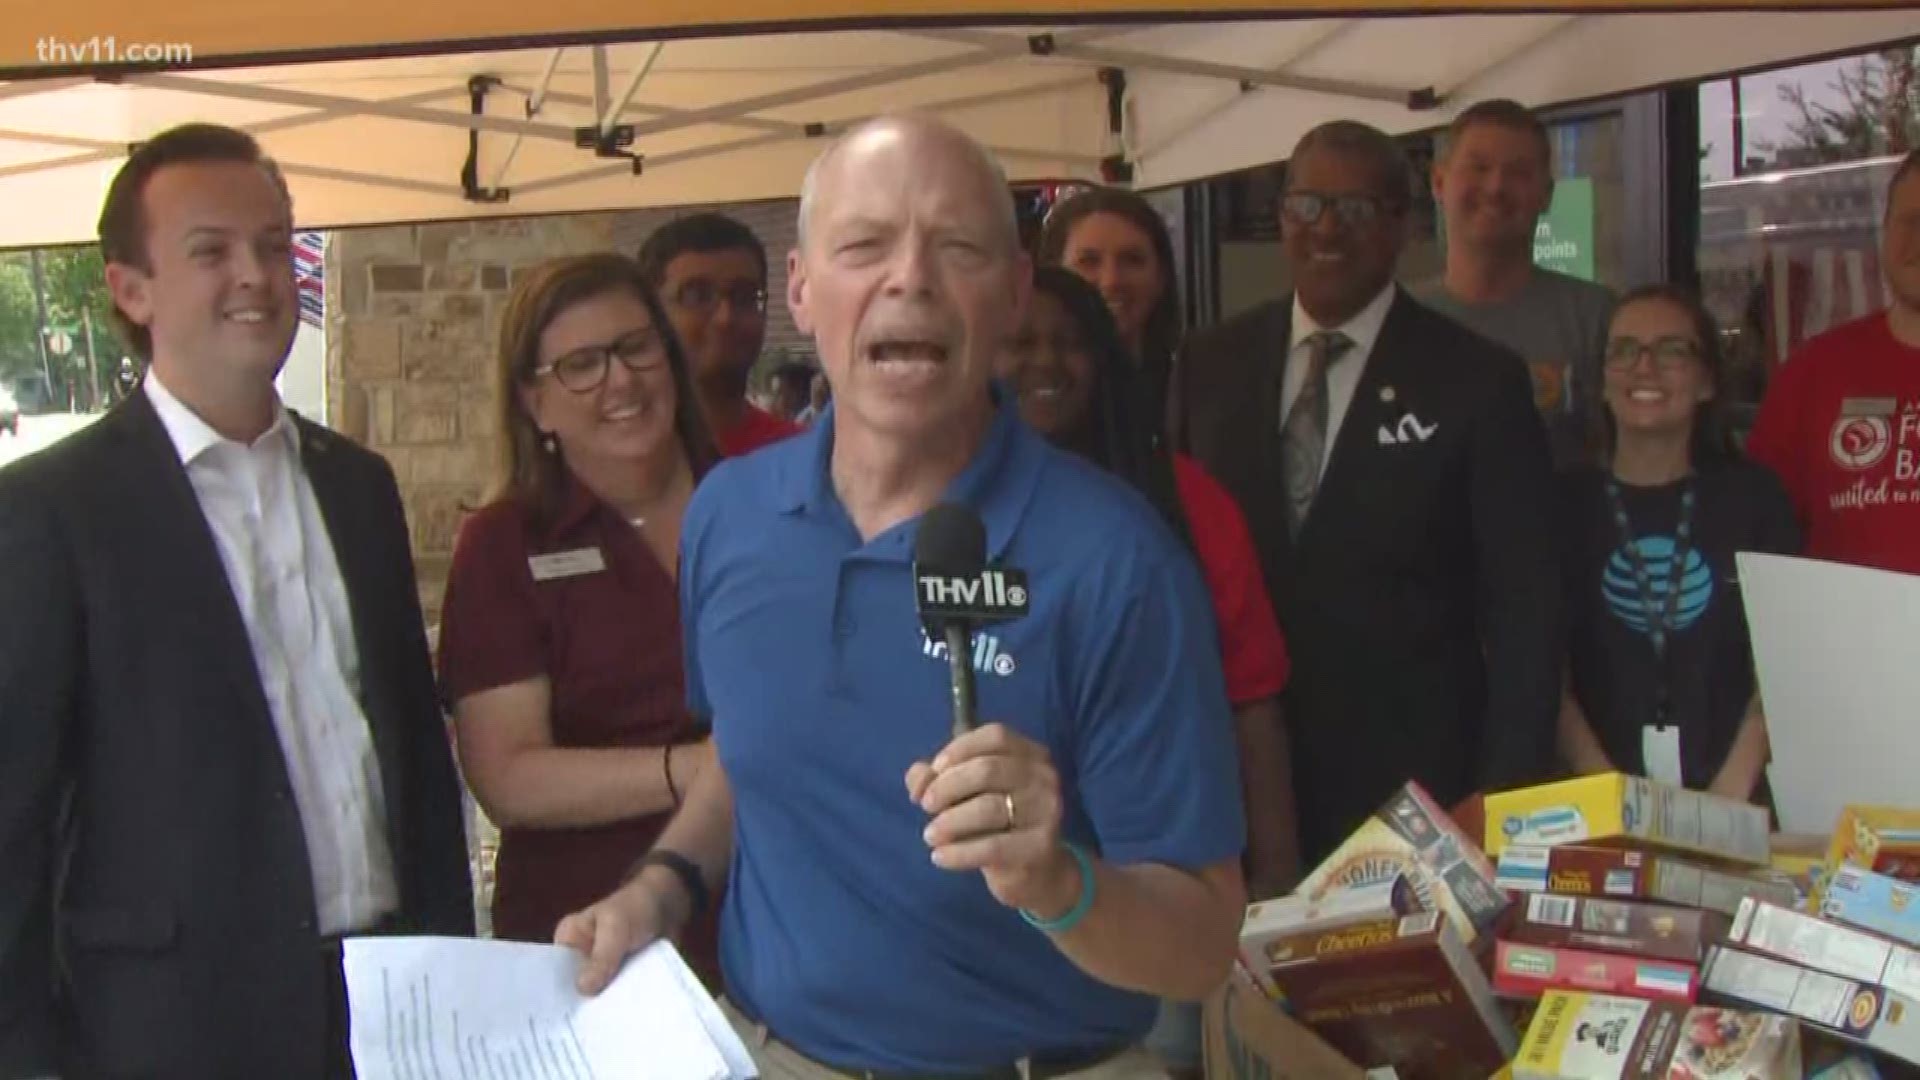 It's the Summer Cereal Drive, and Craig O'Neill doesn't mess around.